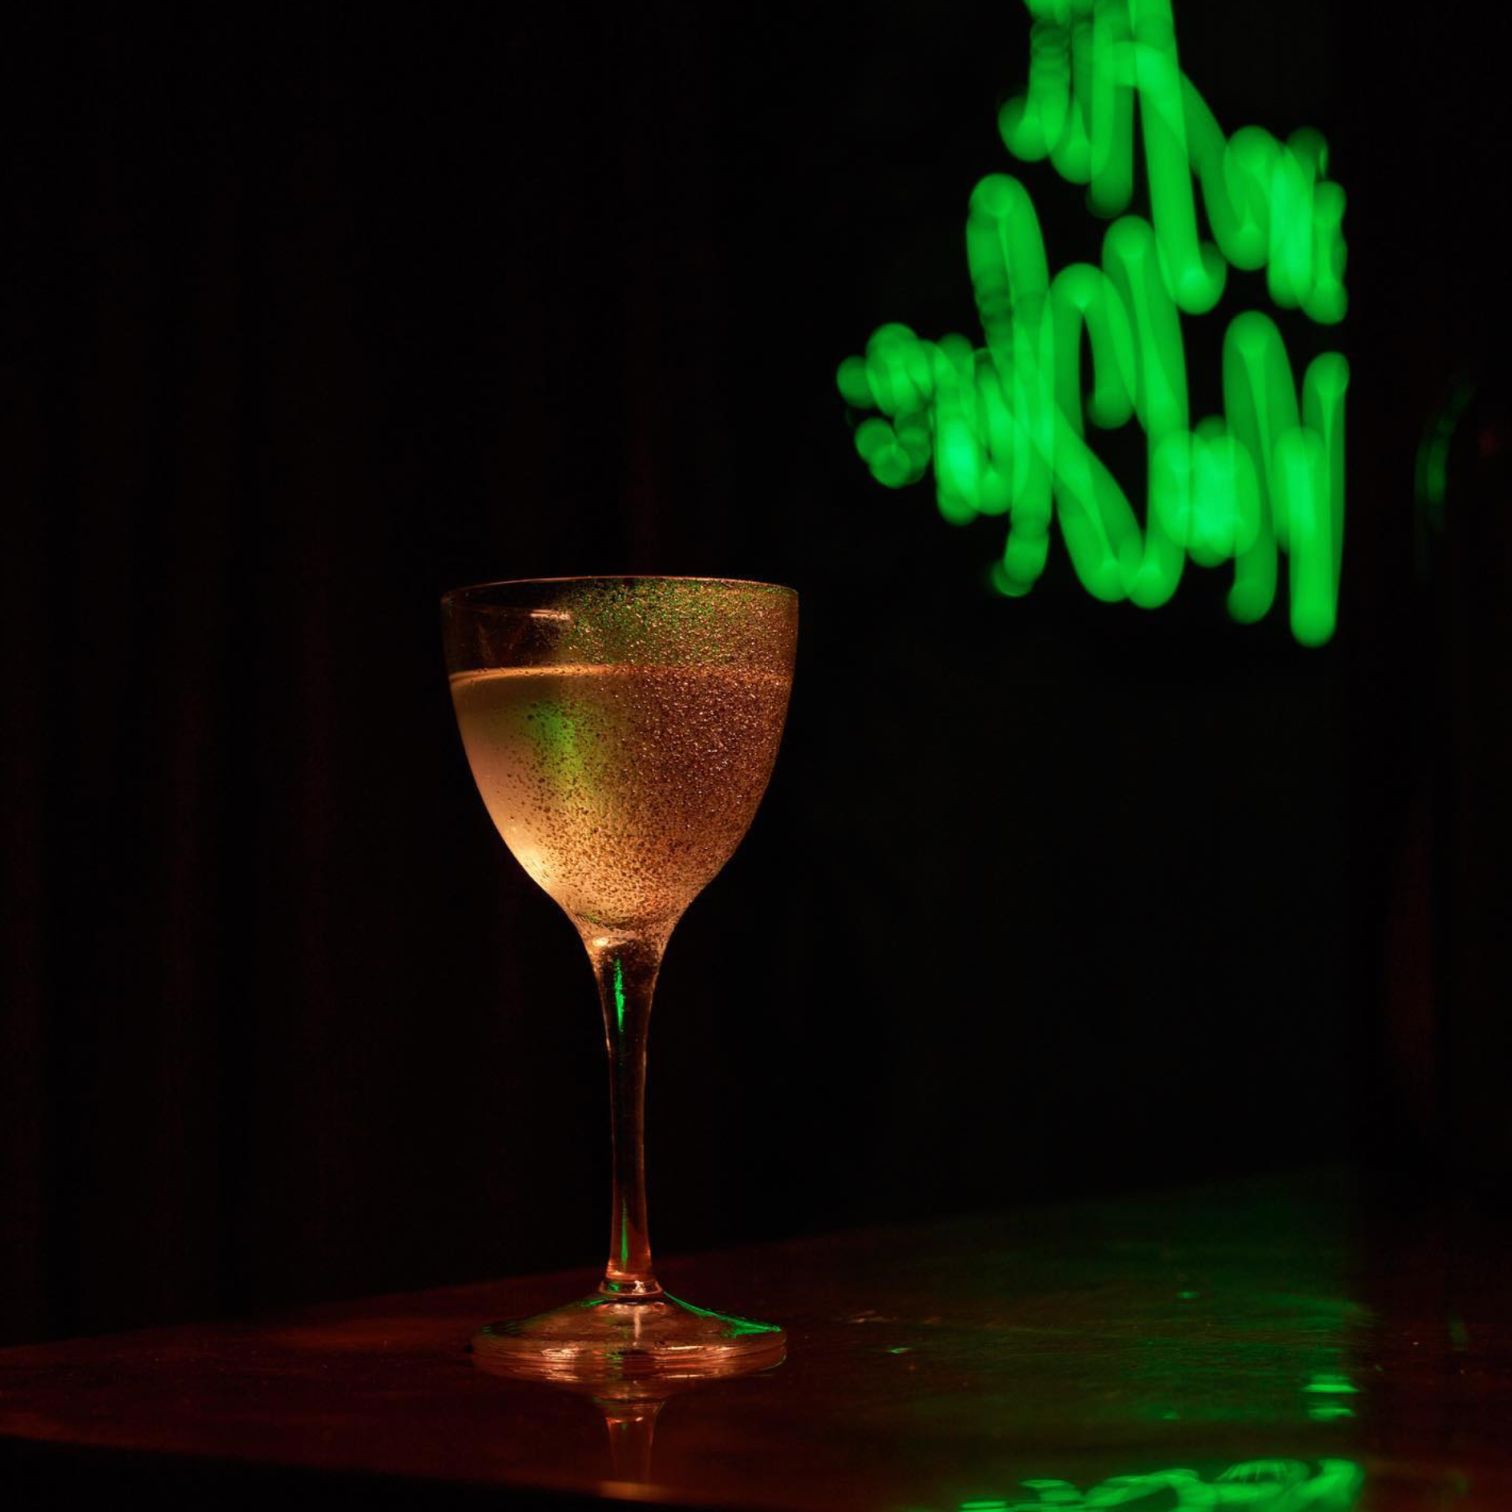 A Glass Of Wine With A Green Neon Sign In The Background